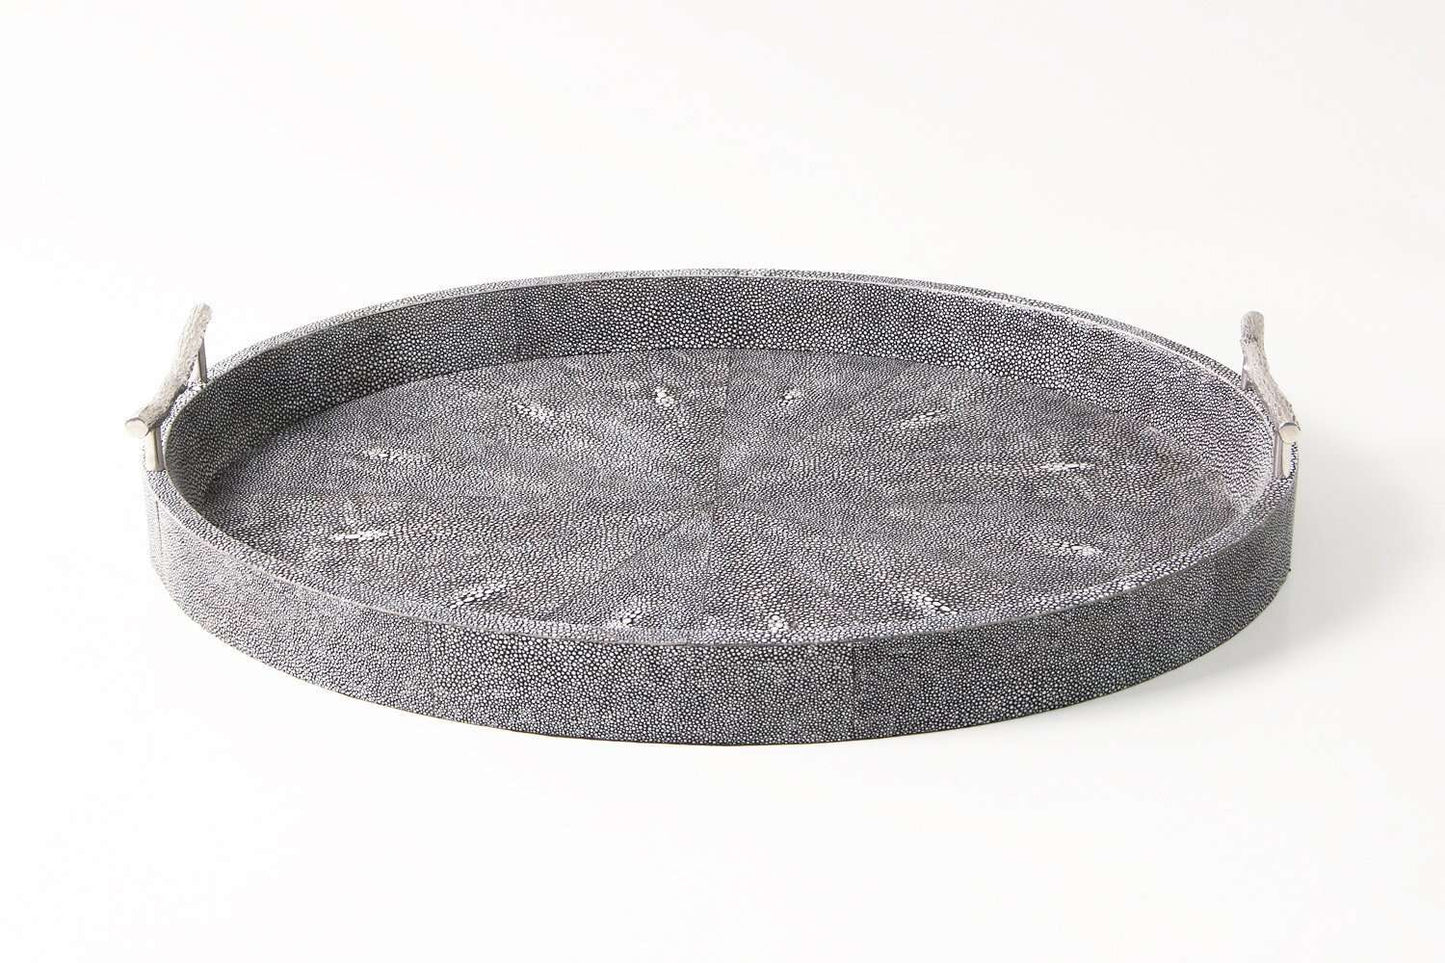 Serving tray chic Forwood Design grey shagreen drinks tray